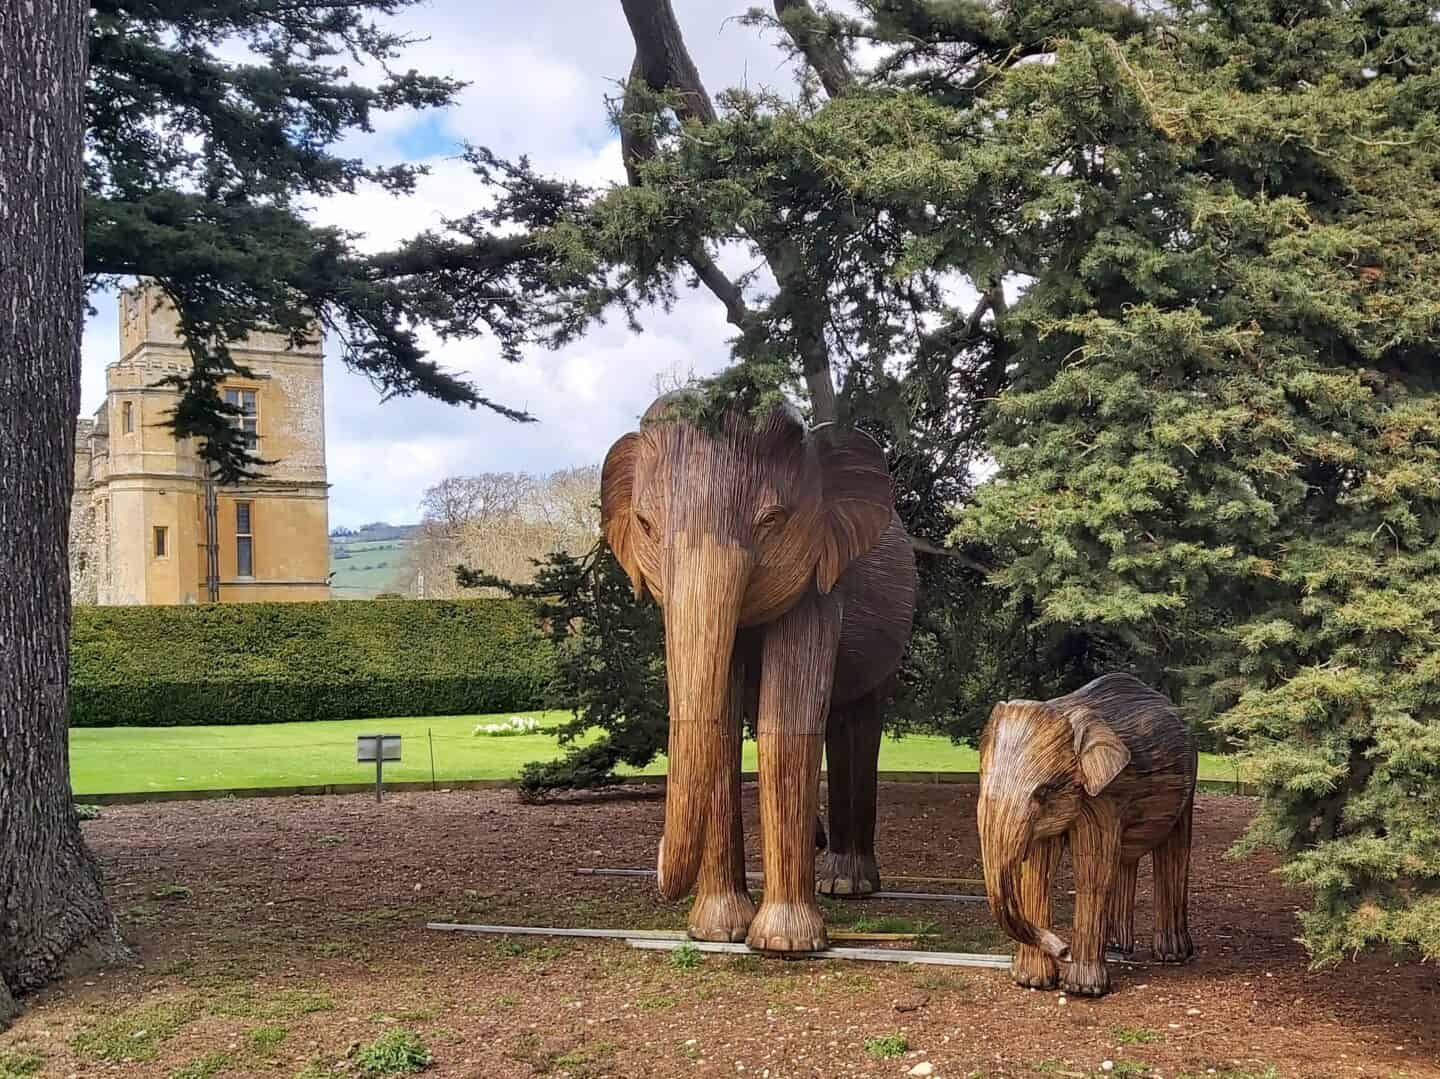 Elephant sculptures under a tree in Sudeley Castle Gardens